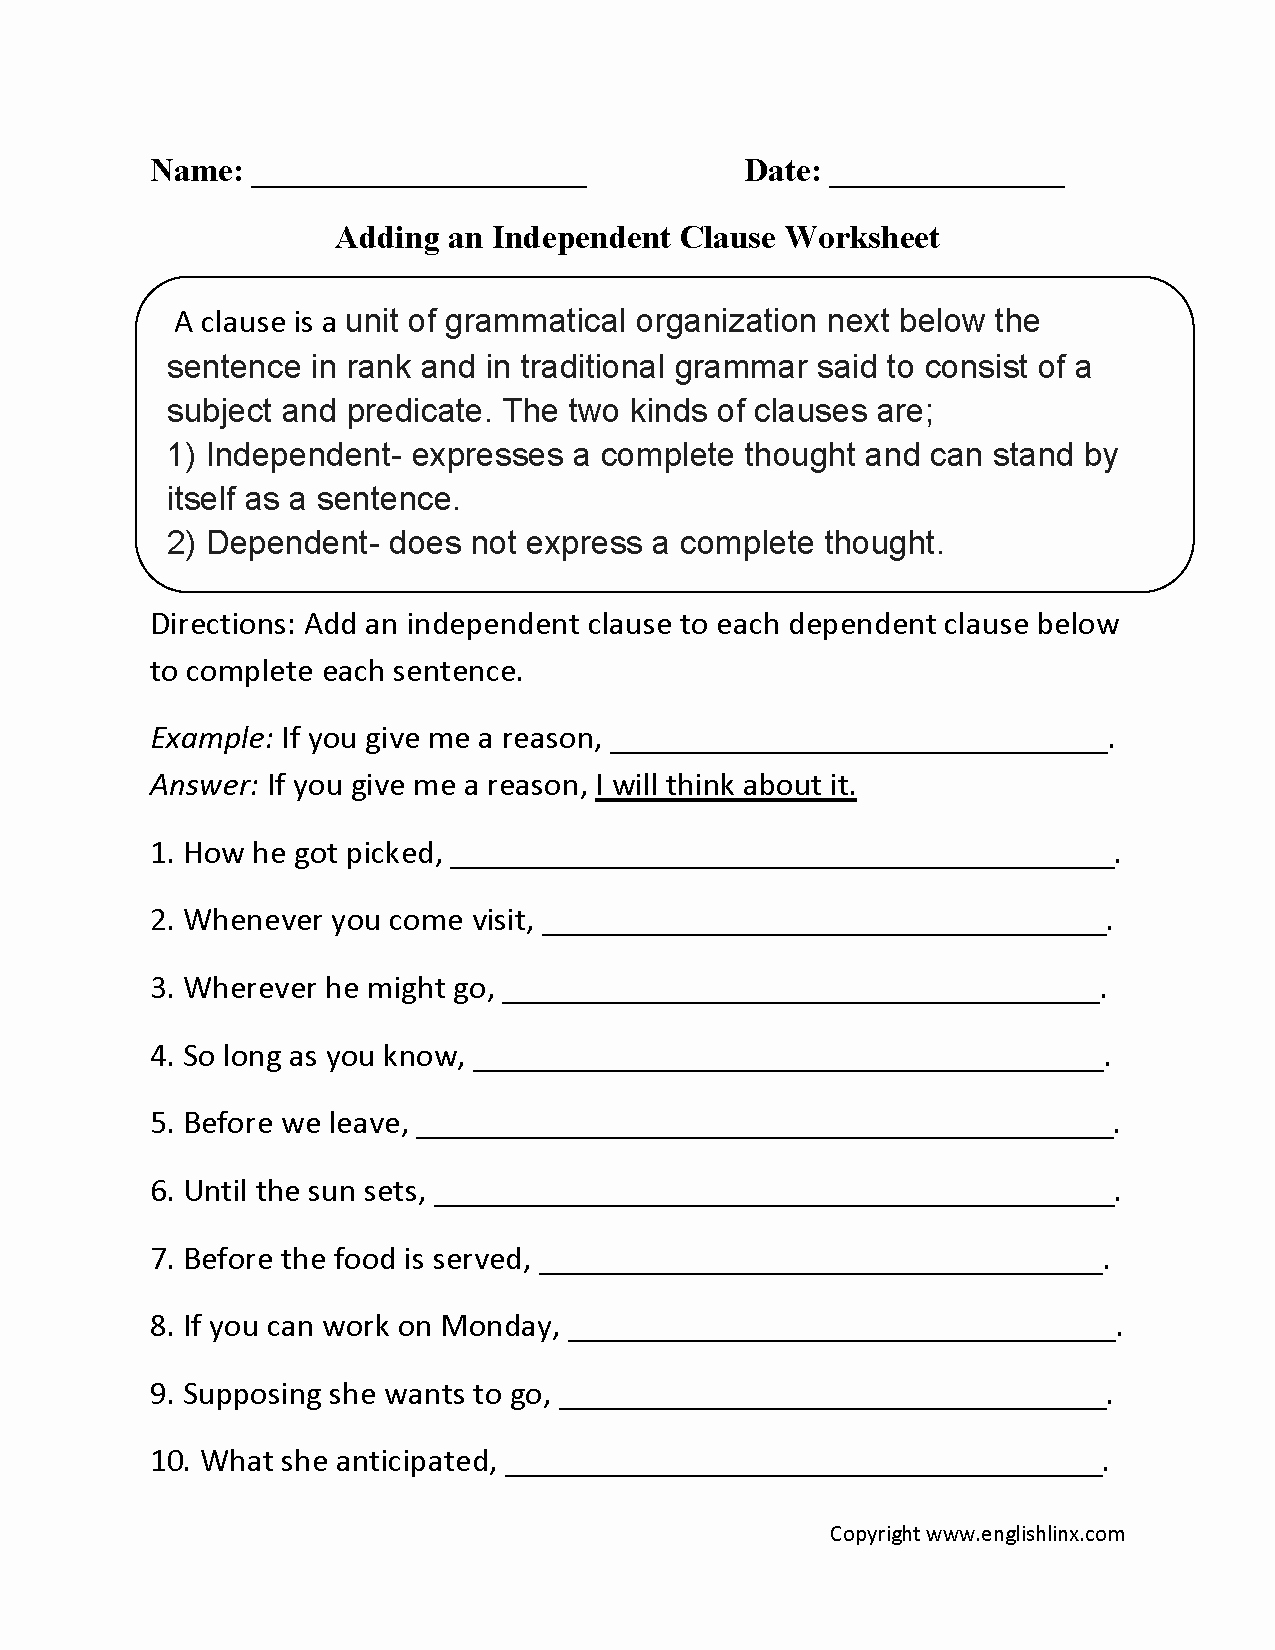 50 Independent And Dependent Clauses Worksheet